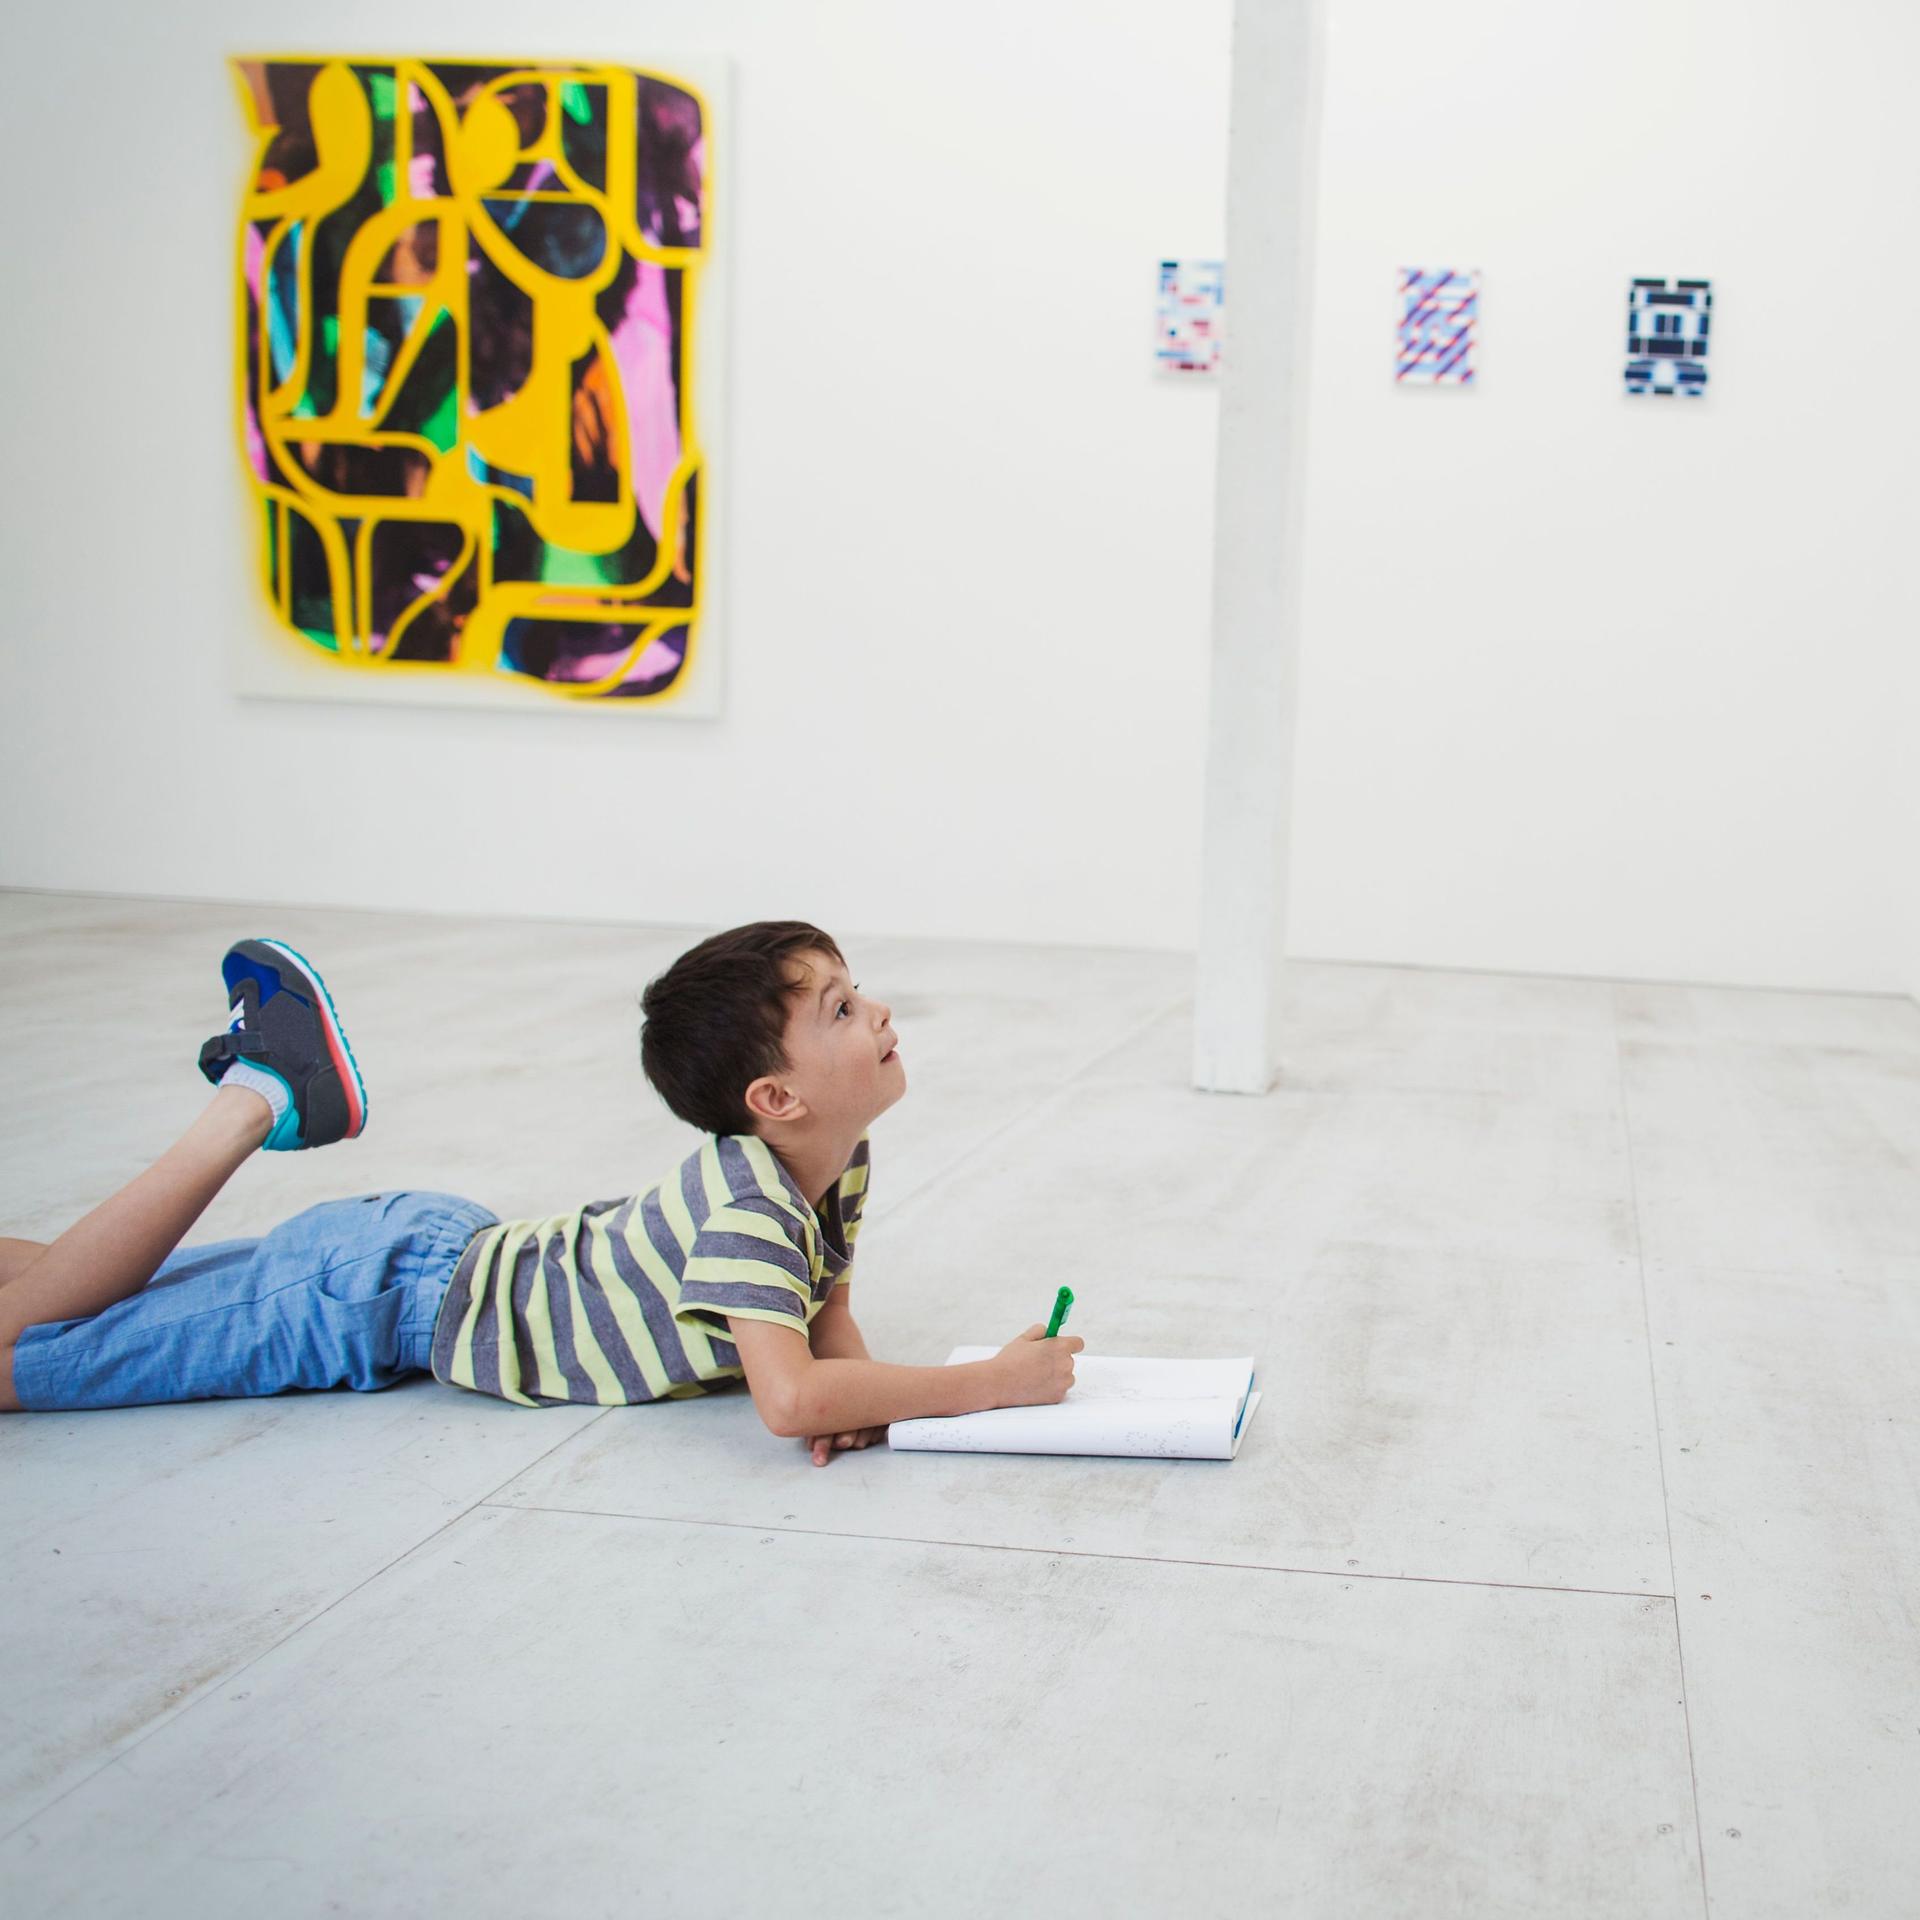 Boy with short black hair lying on floor in art gallery with pen and paper, looking at modern painting.